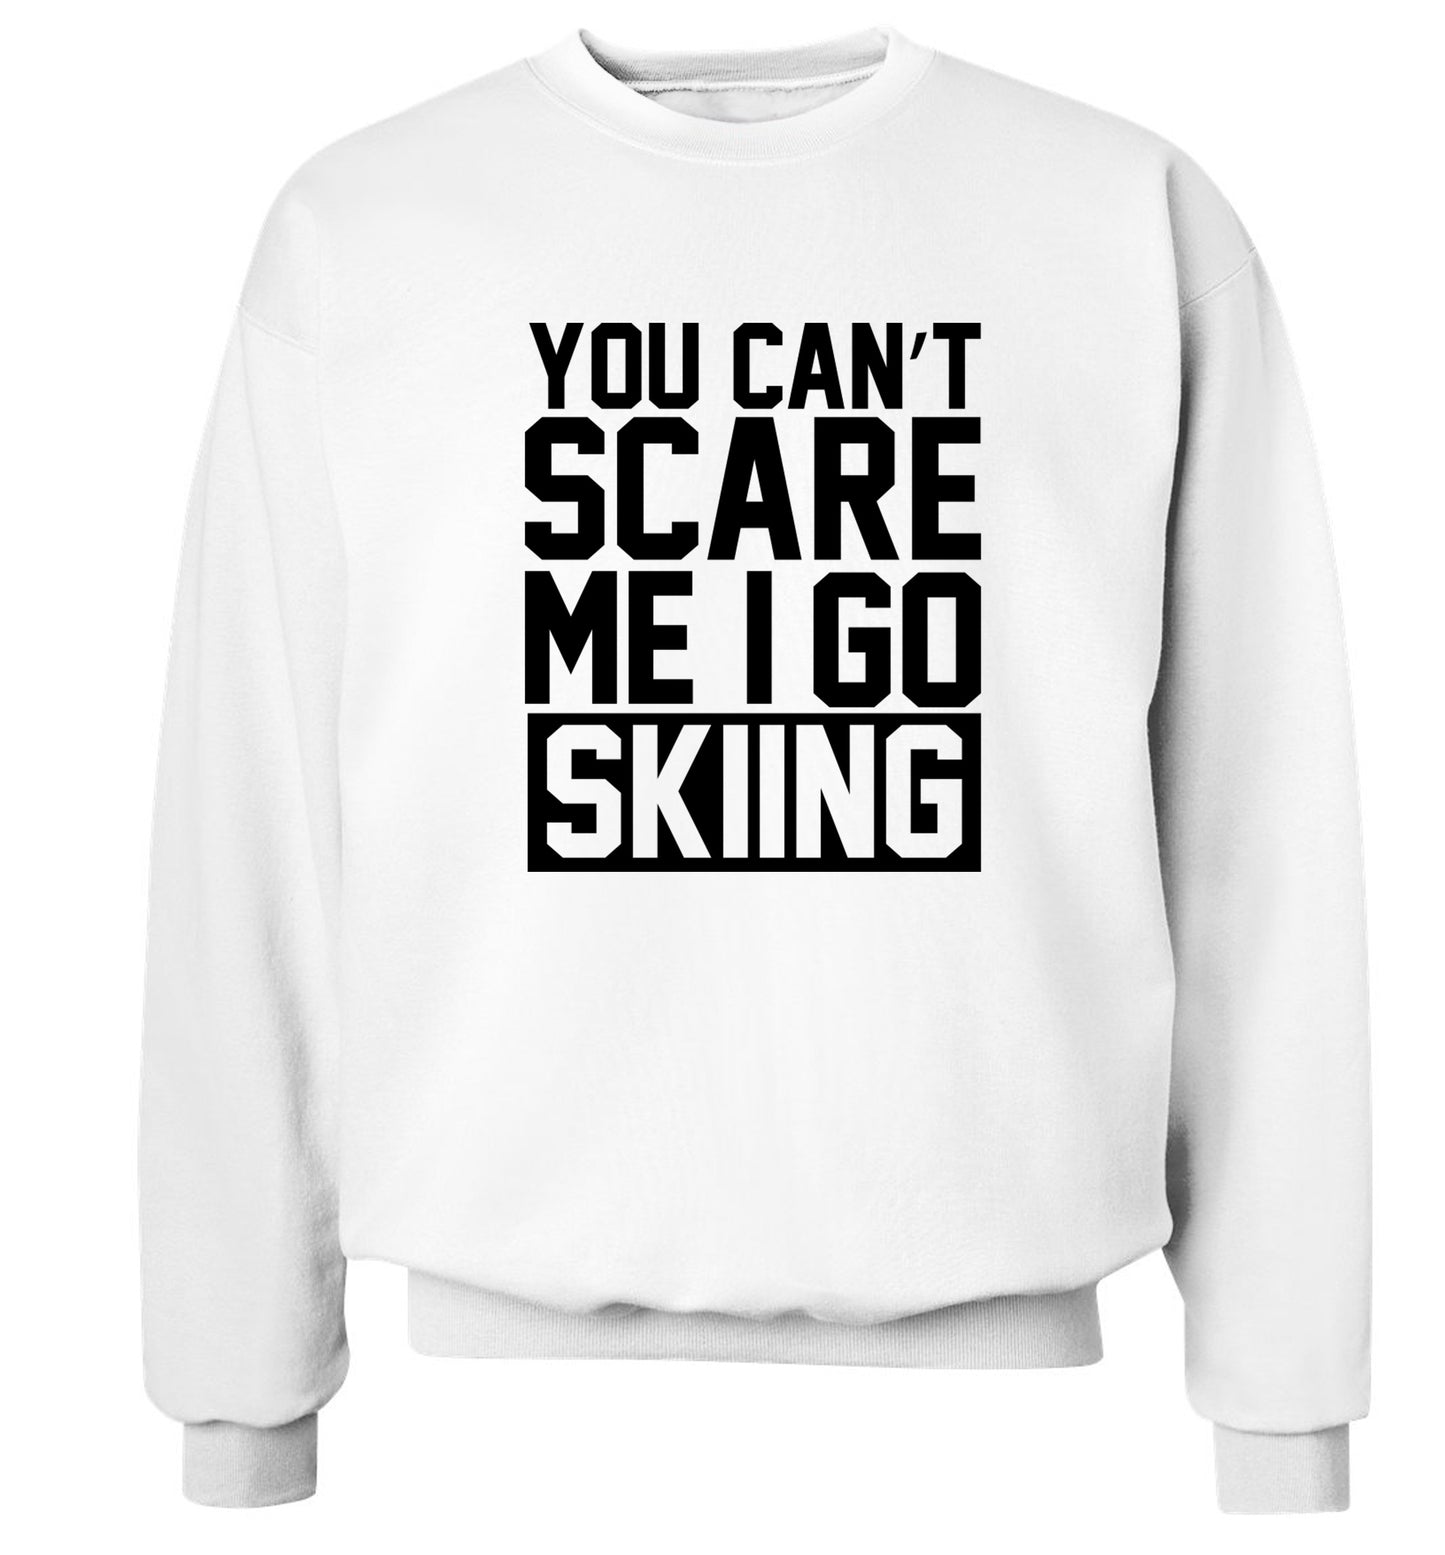 You can't scare me I go skiing Adult's unisex white Sweater 2XL